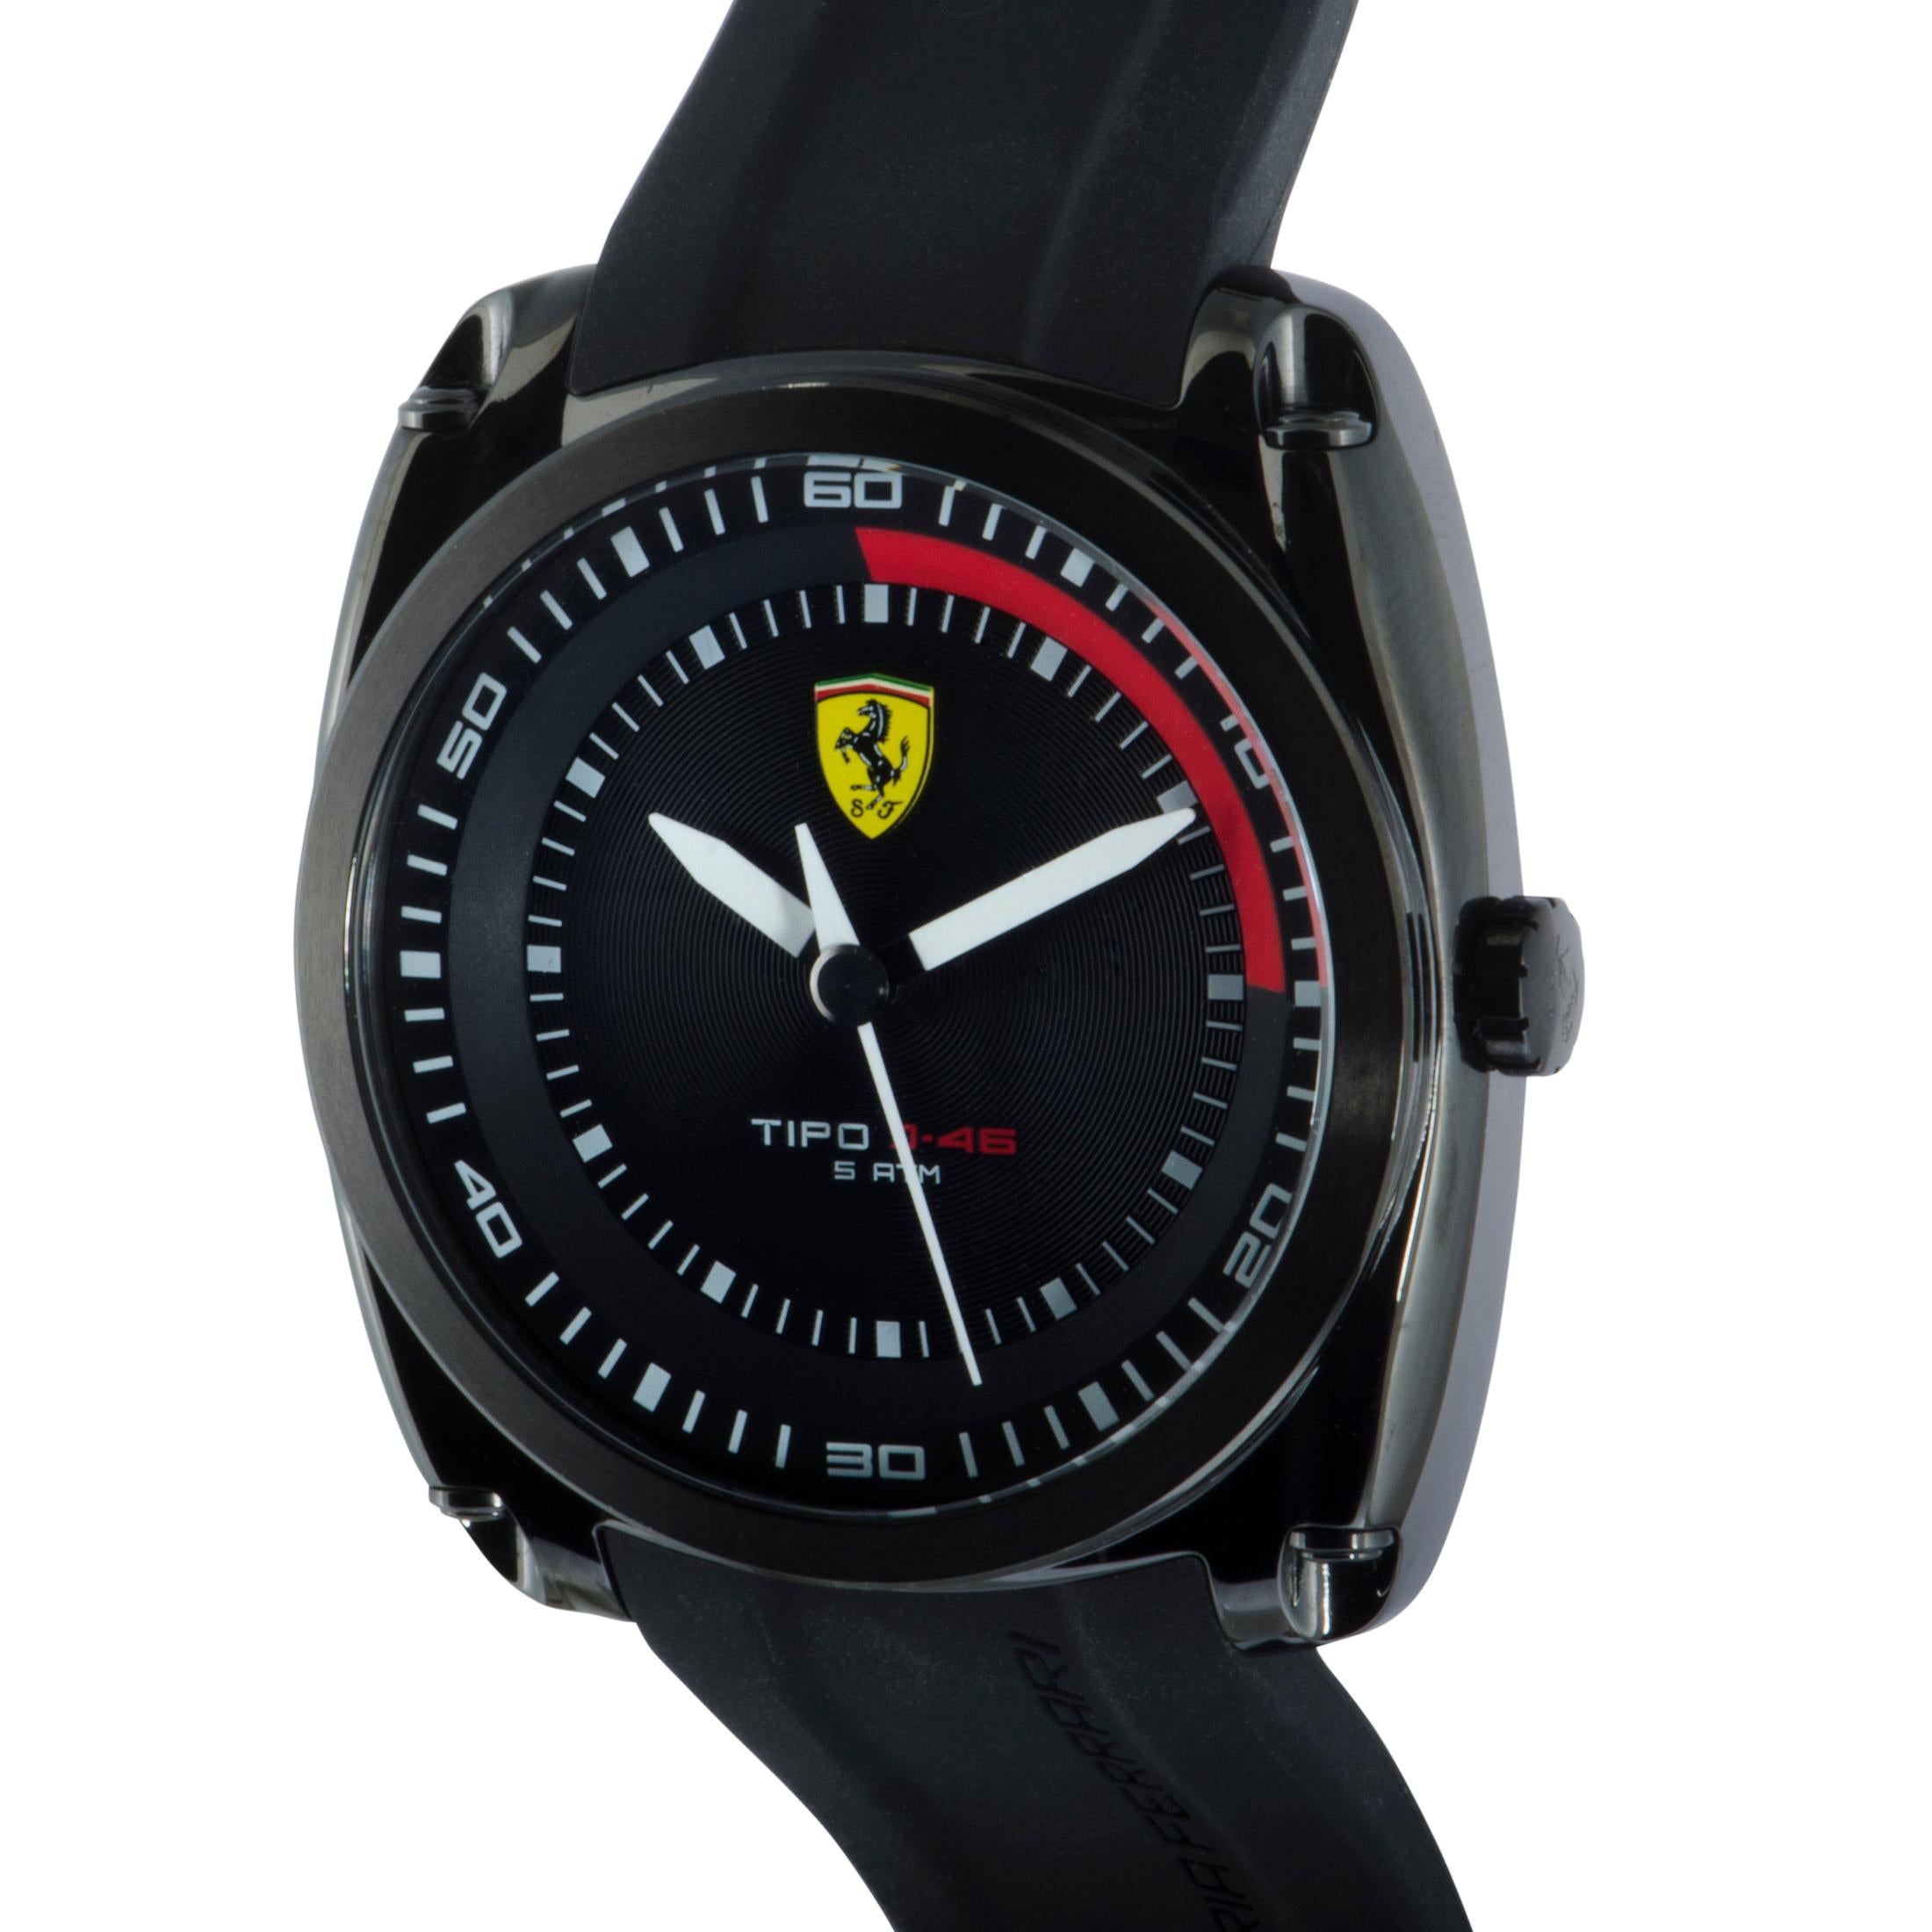 Managing to create a slightly unconventional and remarkably refined appearance while retaining their highly revered spirit through key aesthetic details and tasteful use of the brand’s iconic colors, Scuderia Ferrari presented this technically